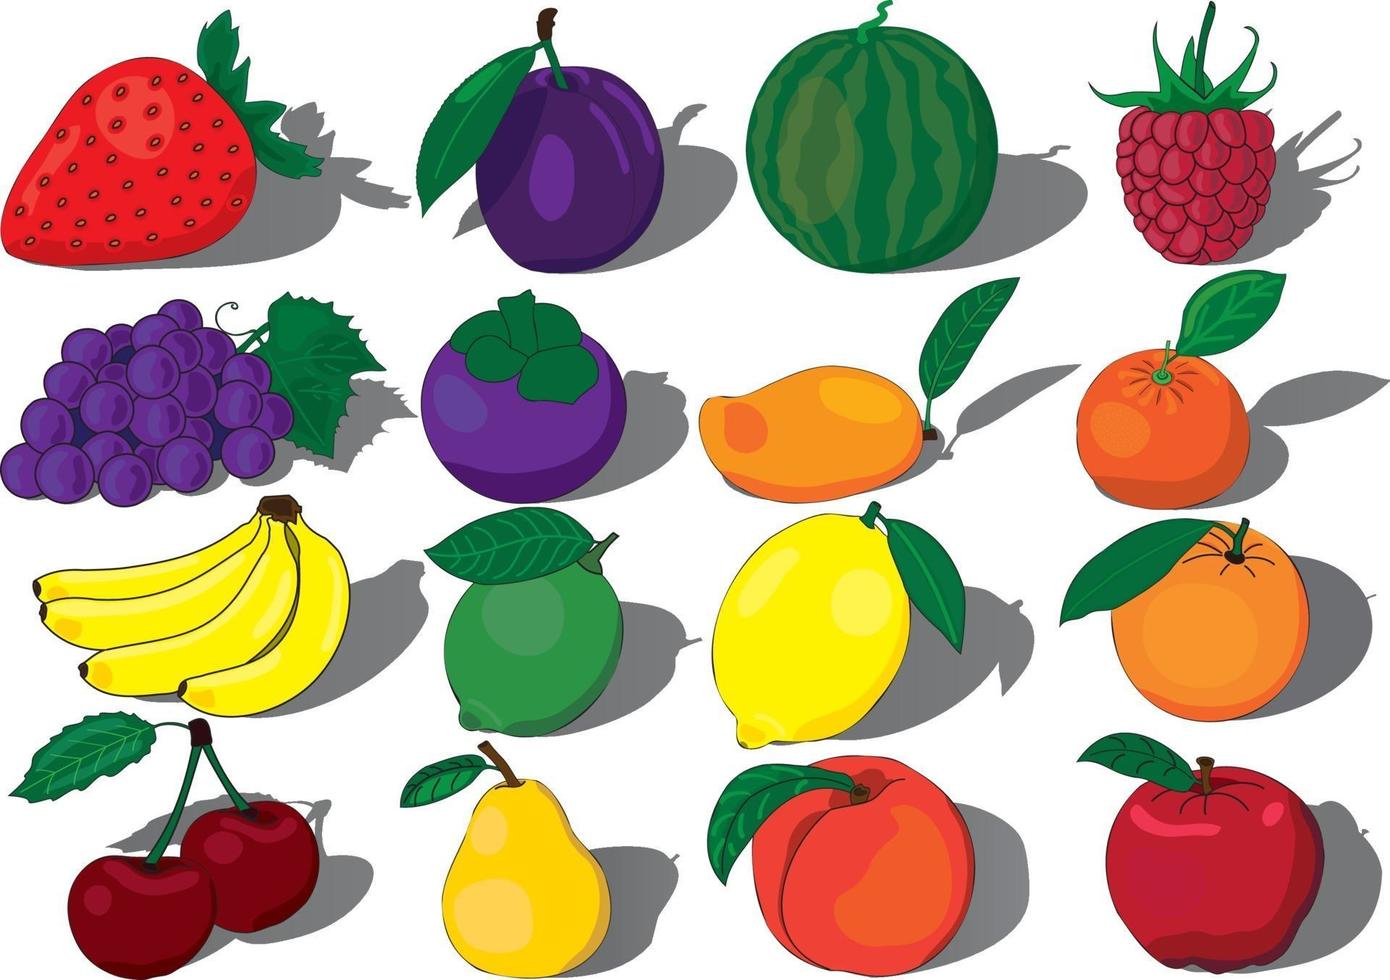 Fruits collection vector illustration